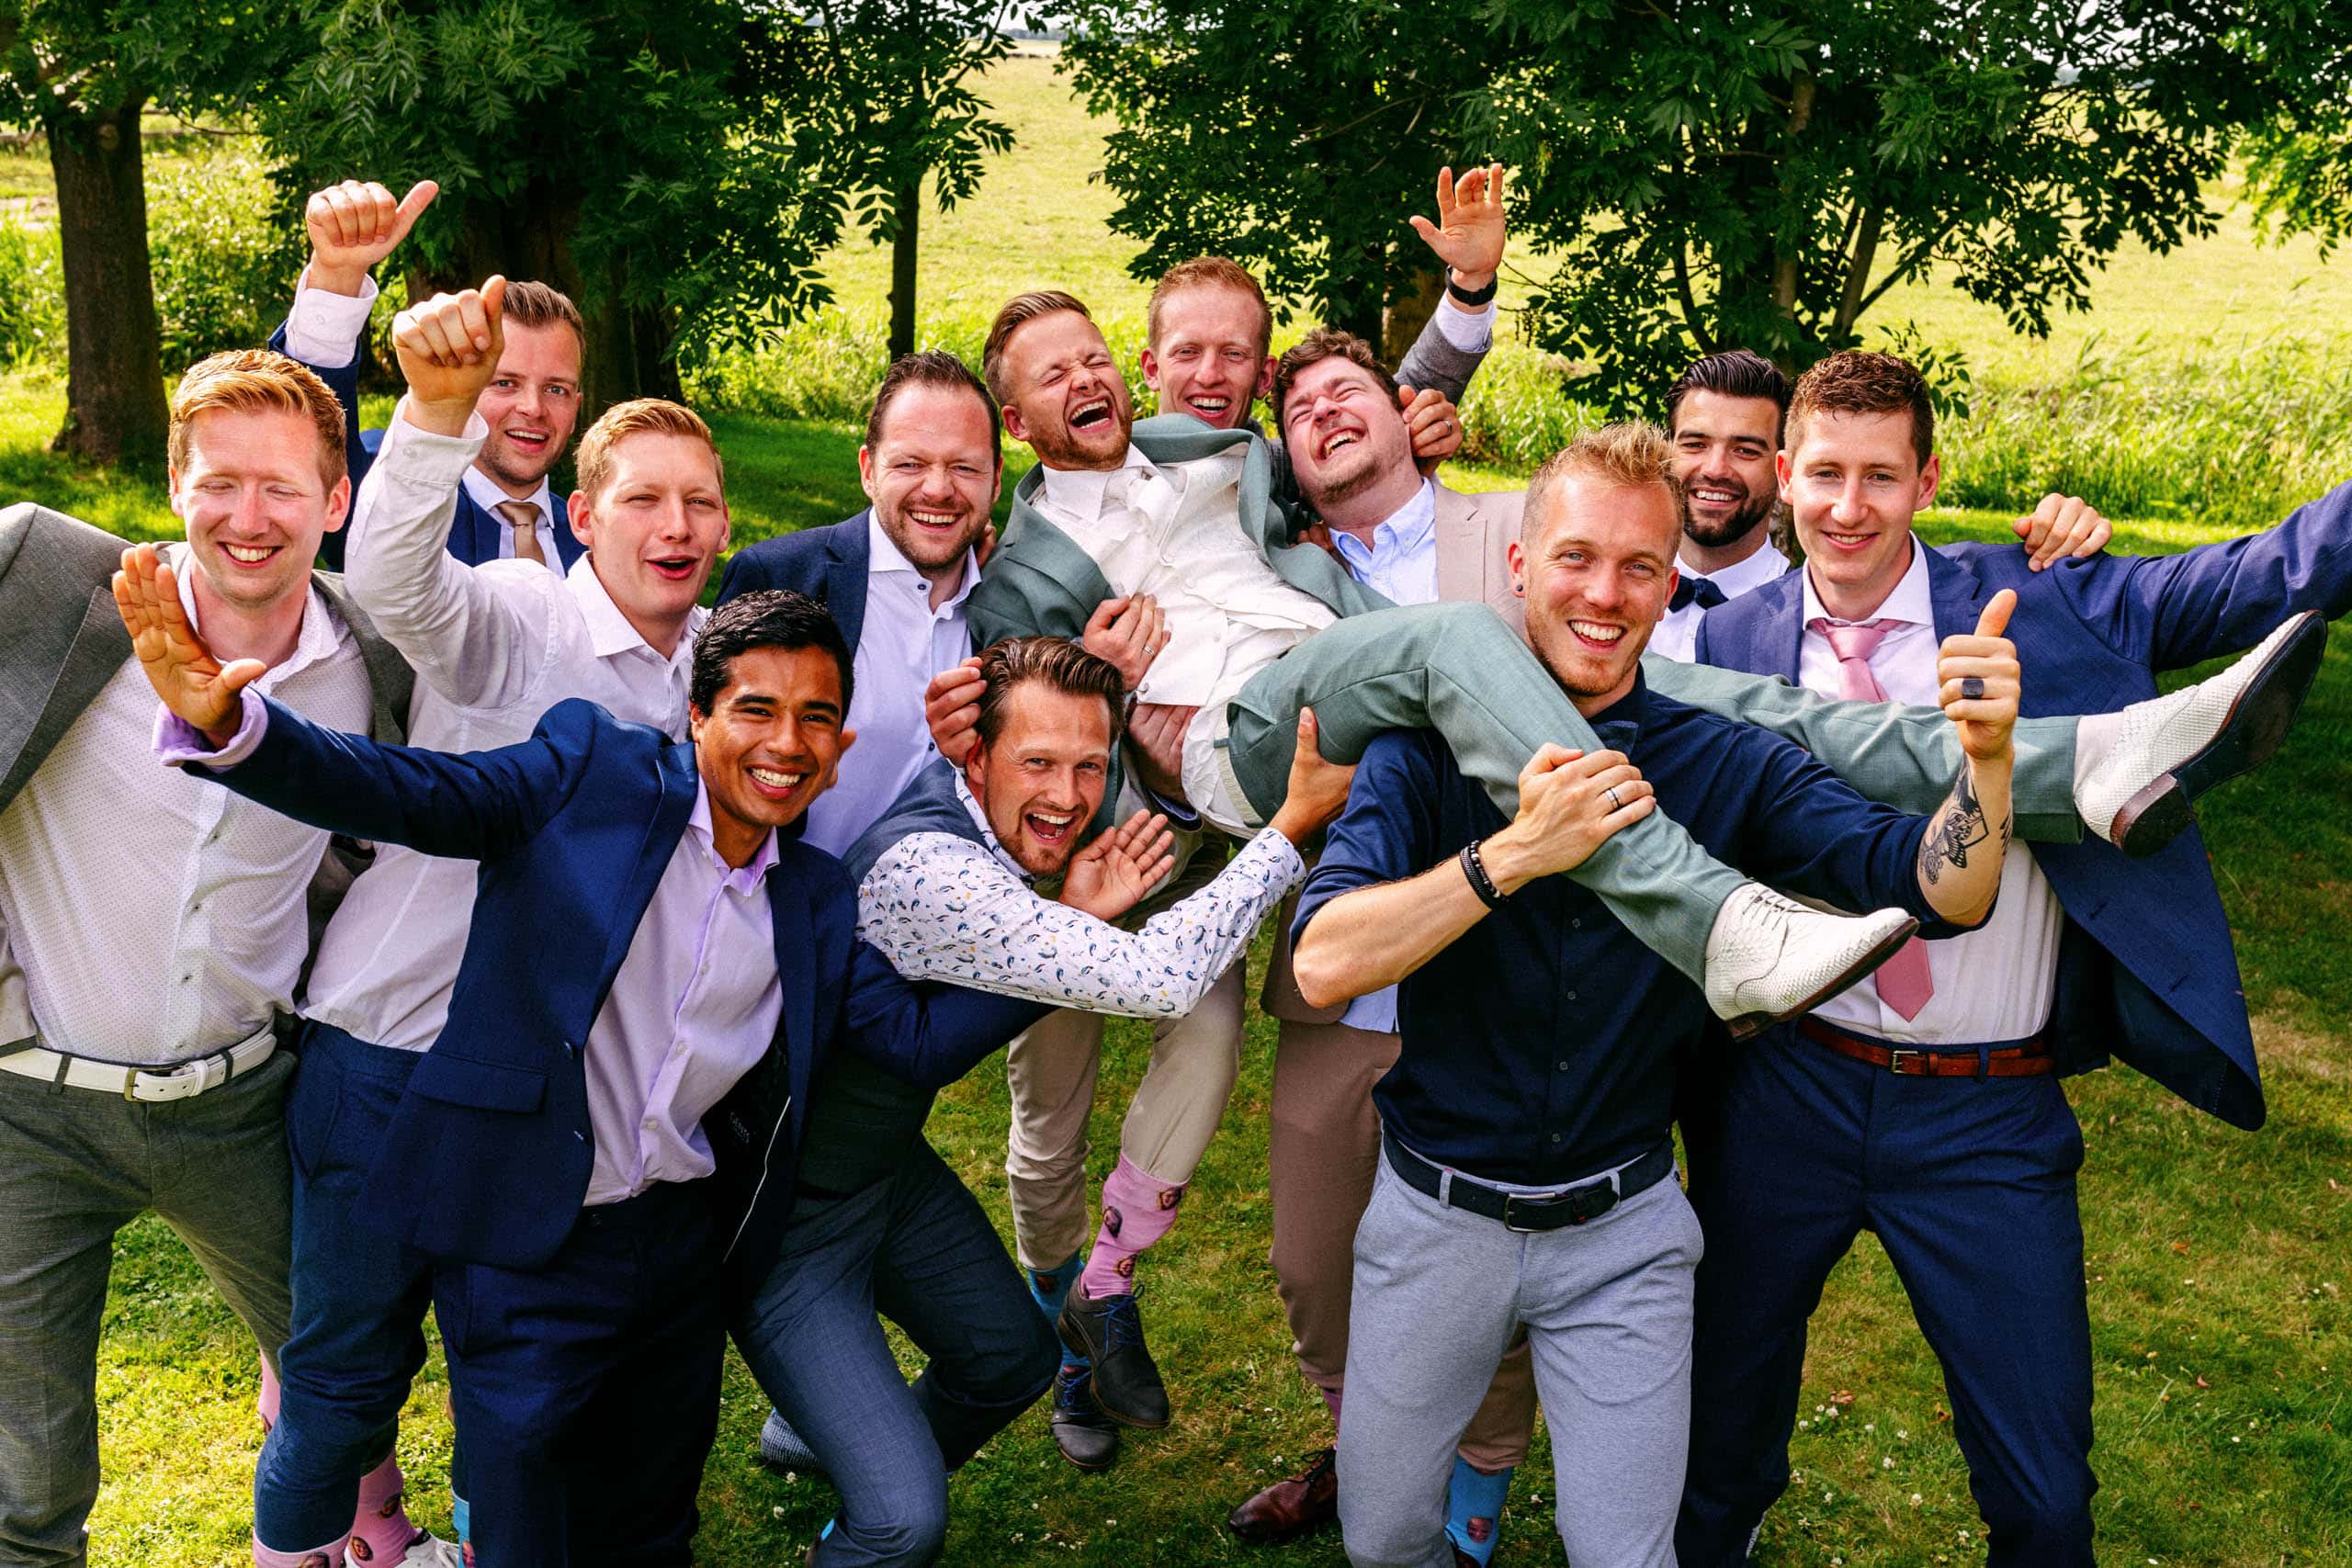 A group of groomsmen taking special wedding photos.